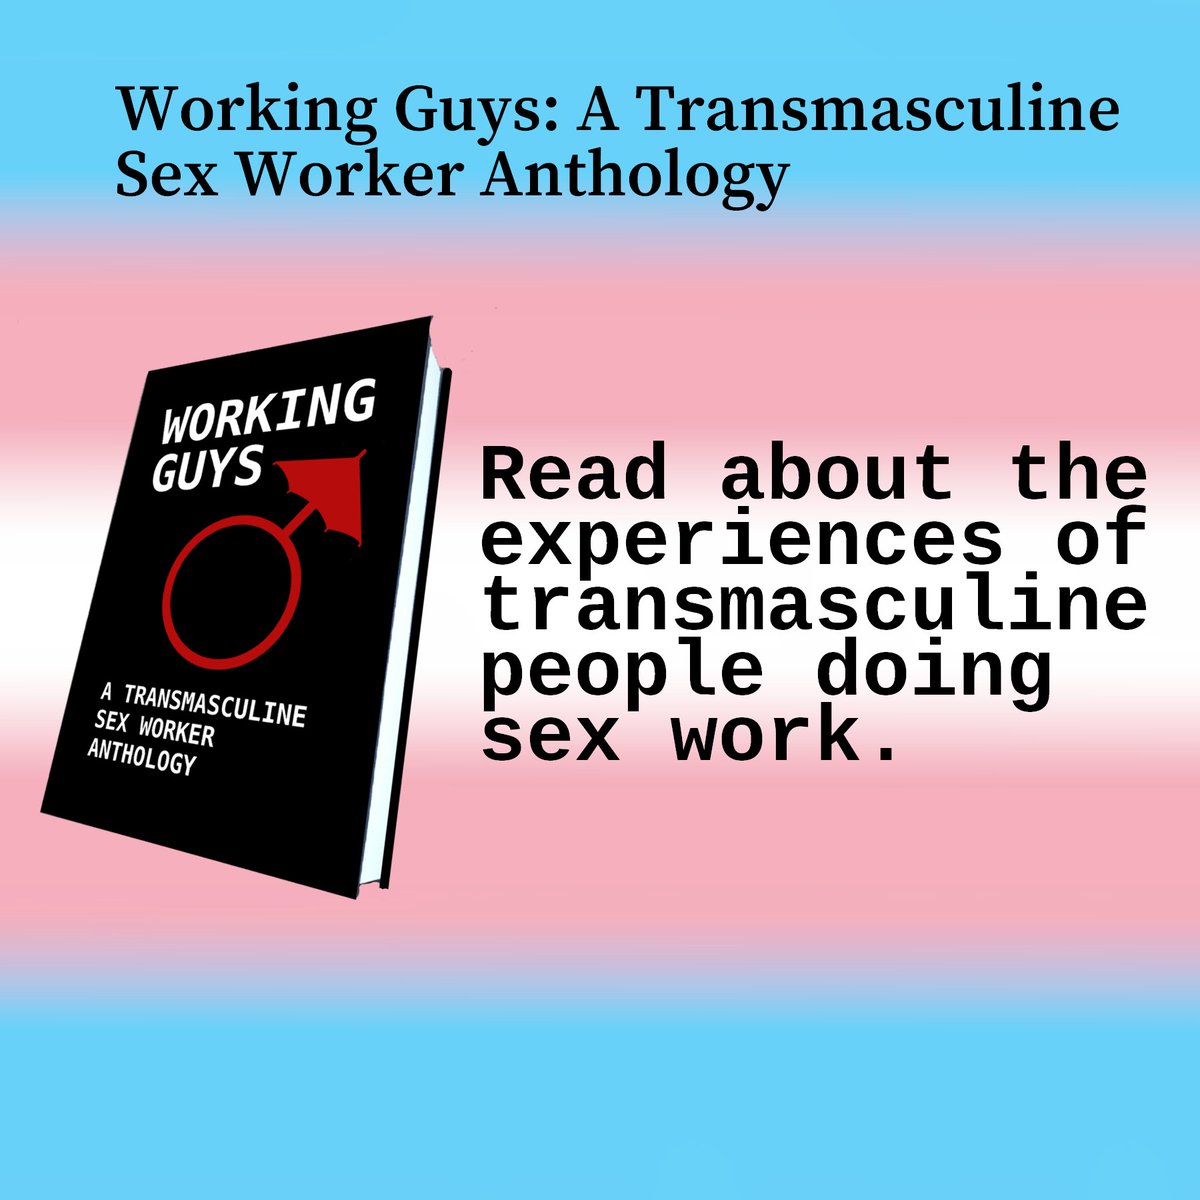 The Kickstarter for Working Guys: A Transmasculine Sex Worker Anthology is now live! Transmasc experiences in sex work are often rendered invisible, so let's share them! Read about what will be included in the book and get yourself a copy: kickstarter.com/projects/mxjac…